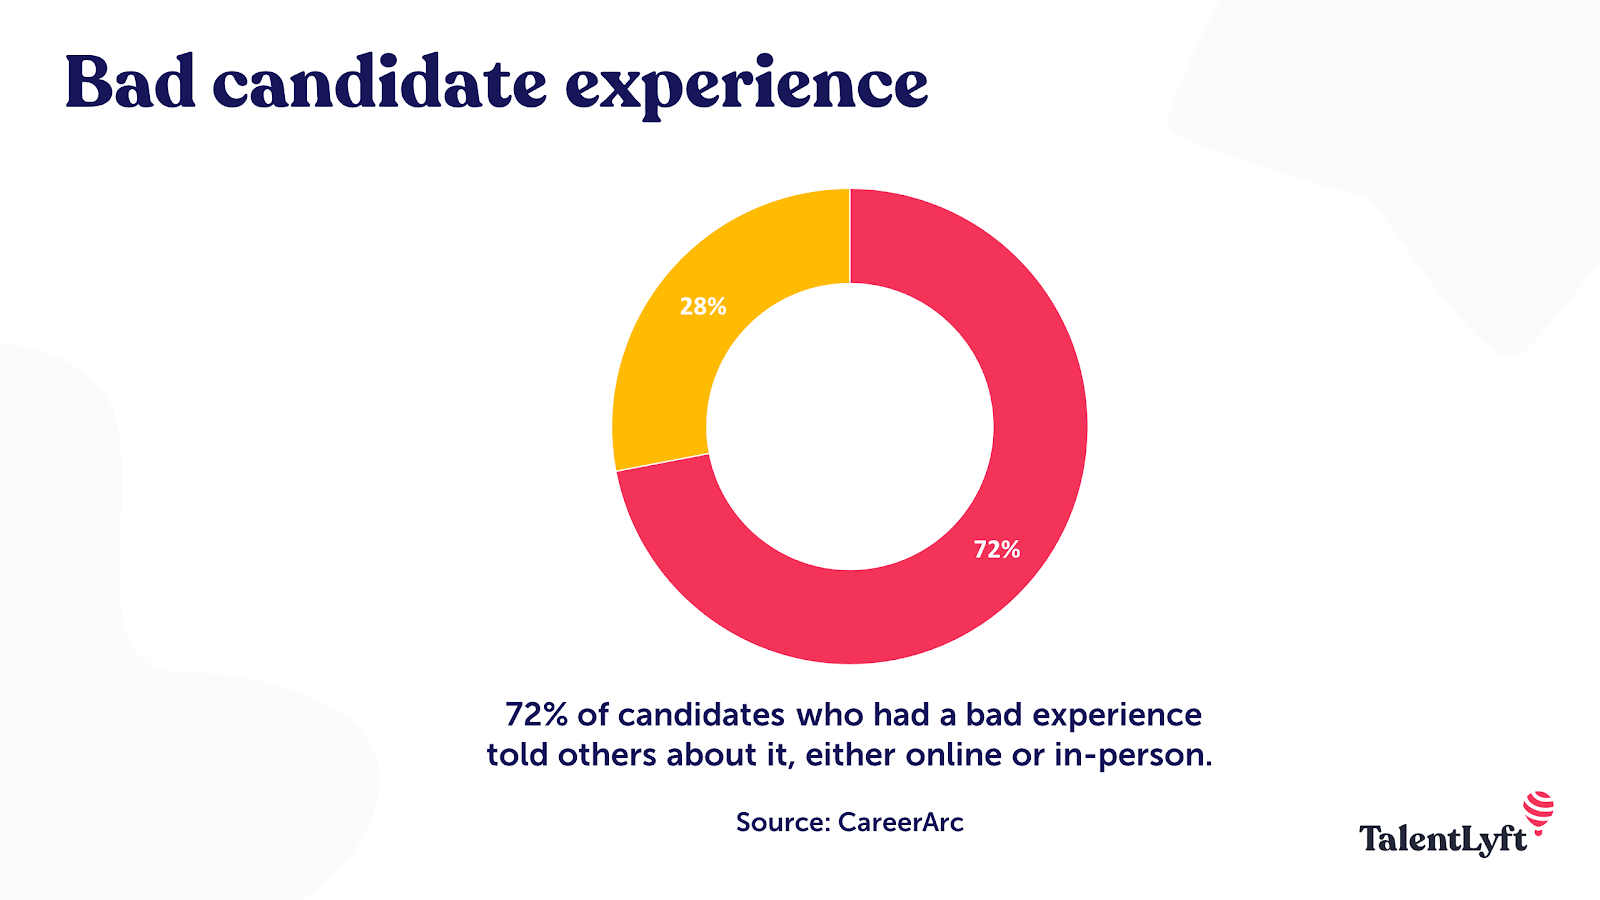 Rejected candidates and importance of bad candidate experience